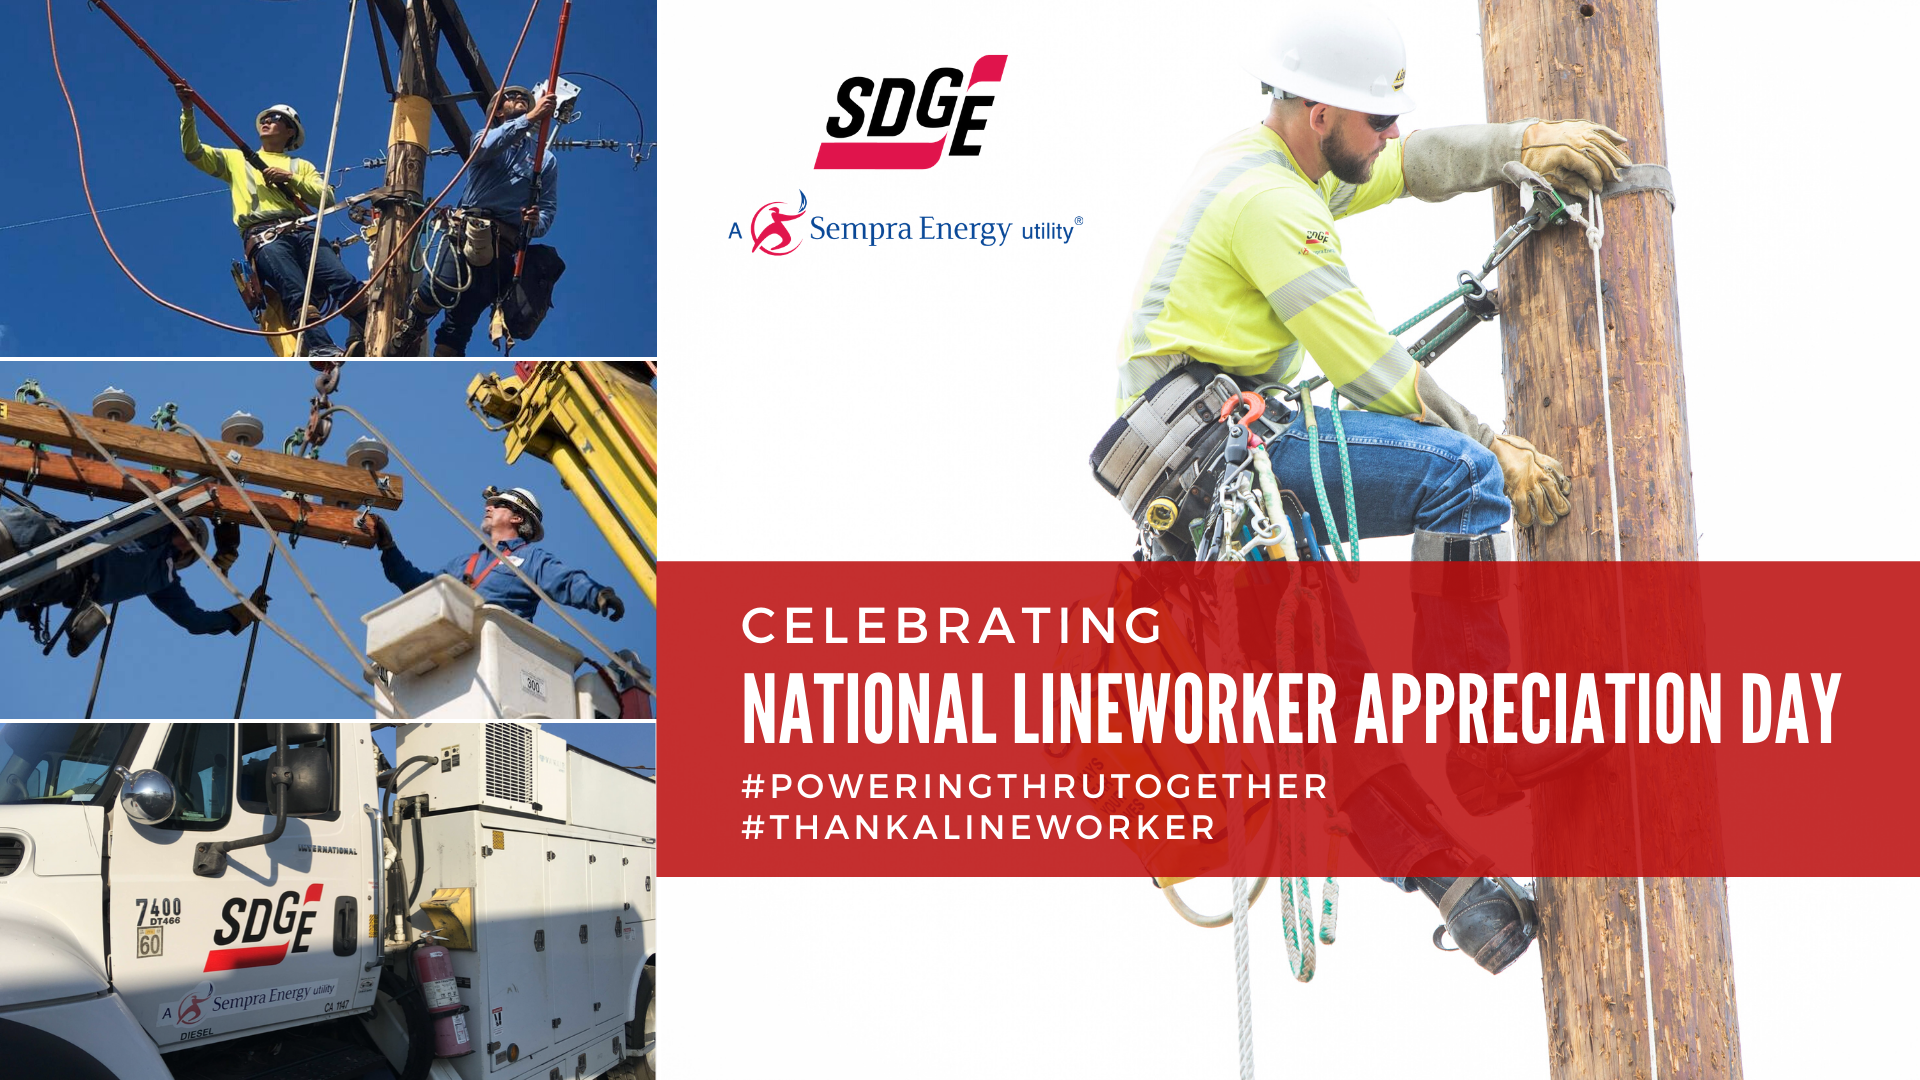 ThankALineworker for National Lineworker Appreciation Day SDGE San